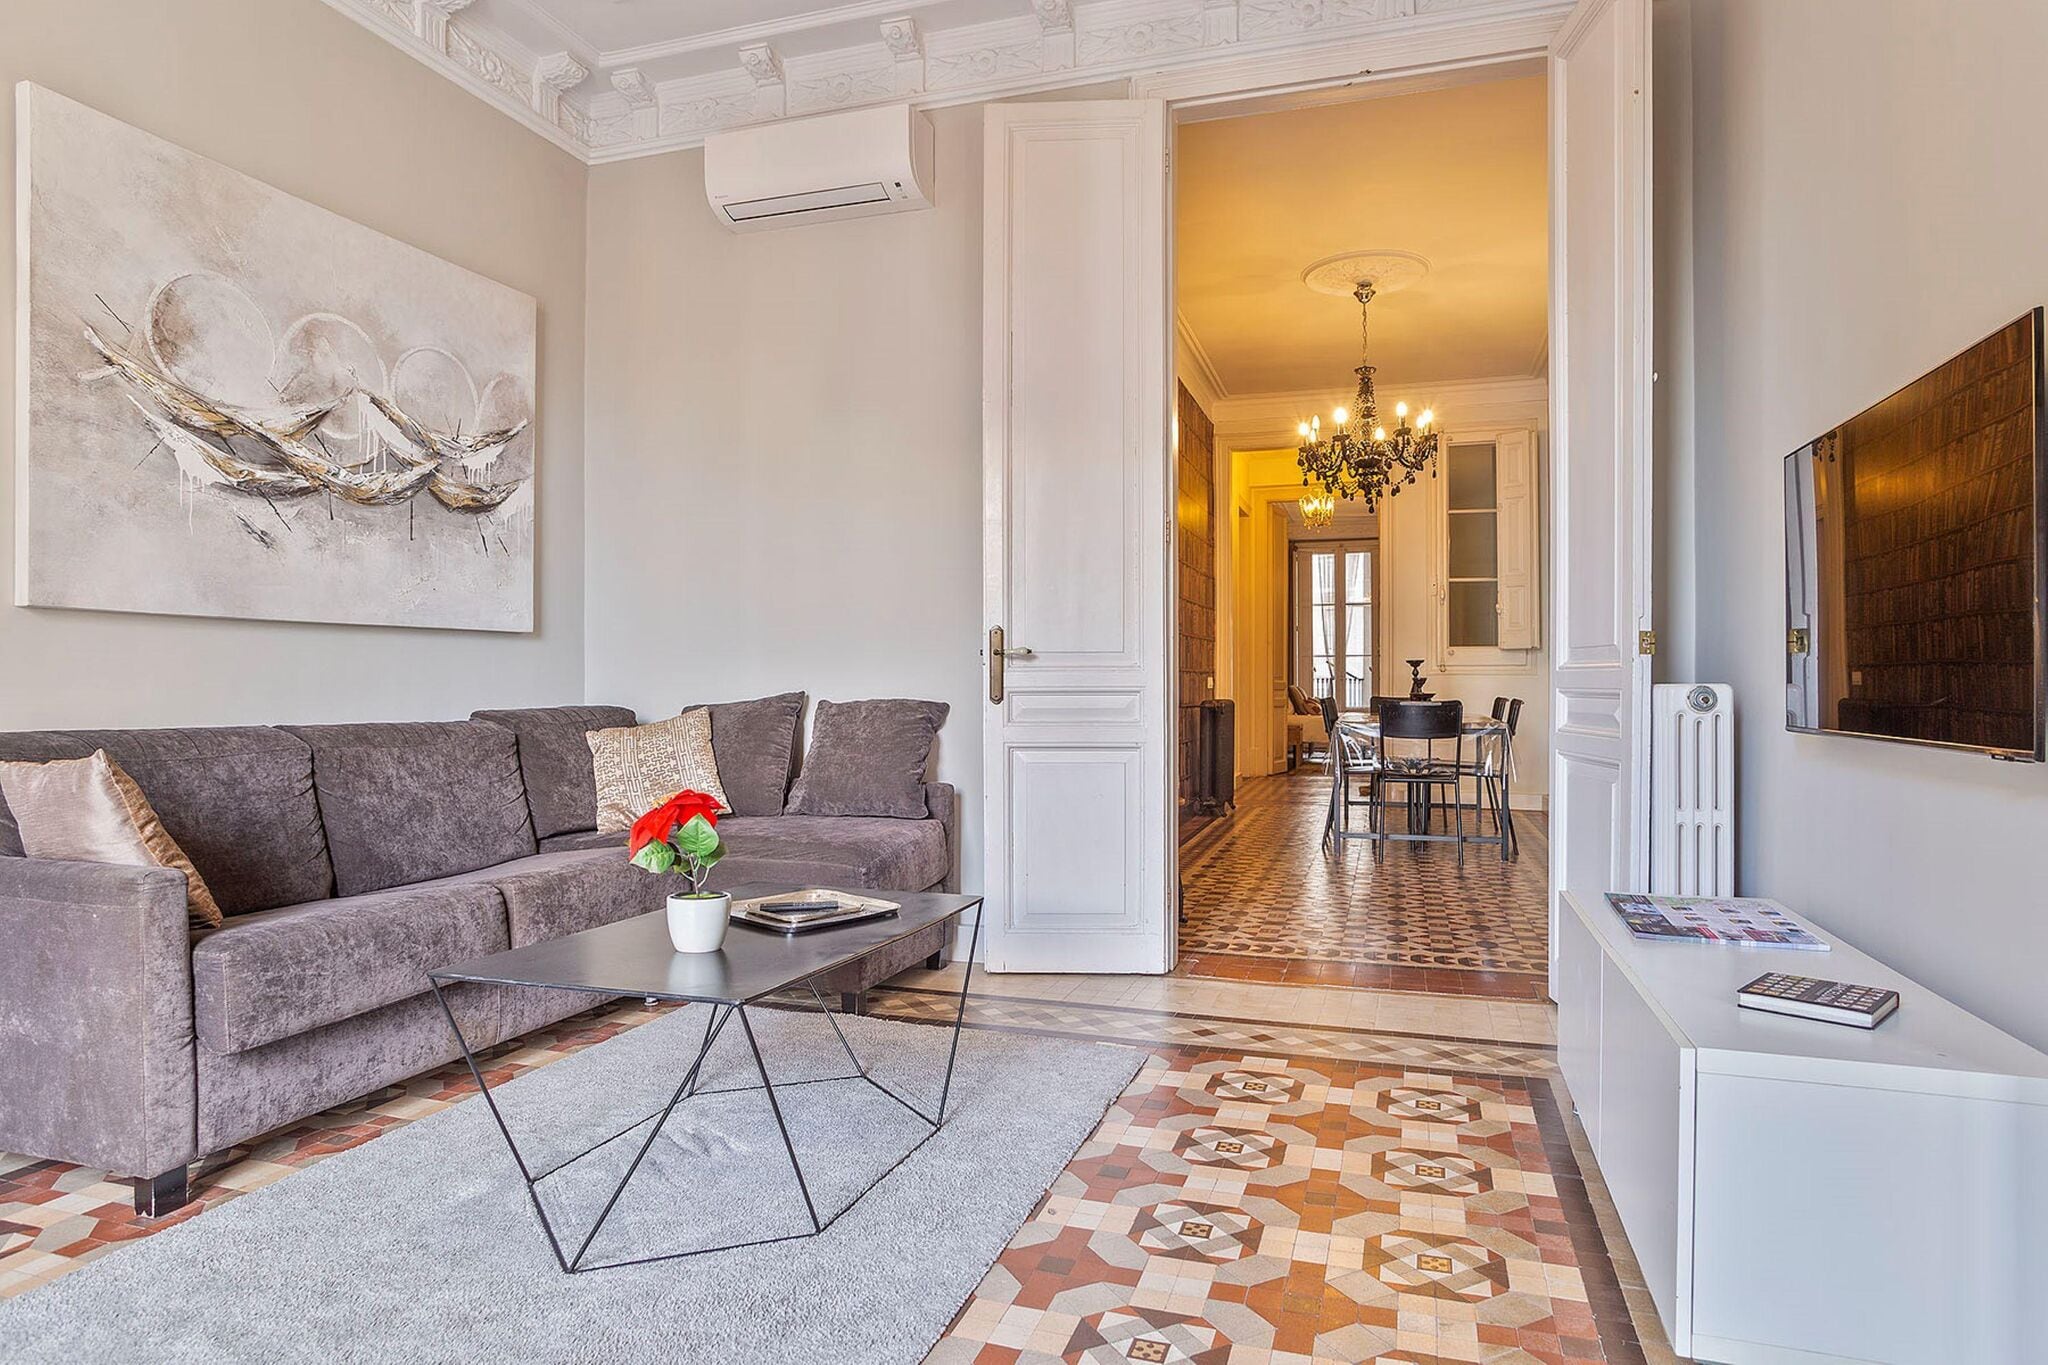 Luxurious apartment for 8 people recently renovated in the center of Barcelona